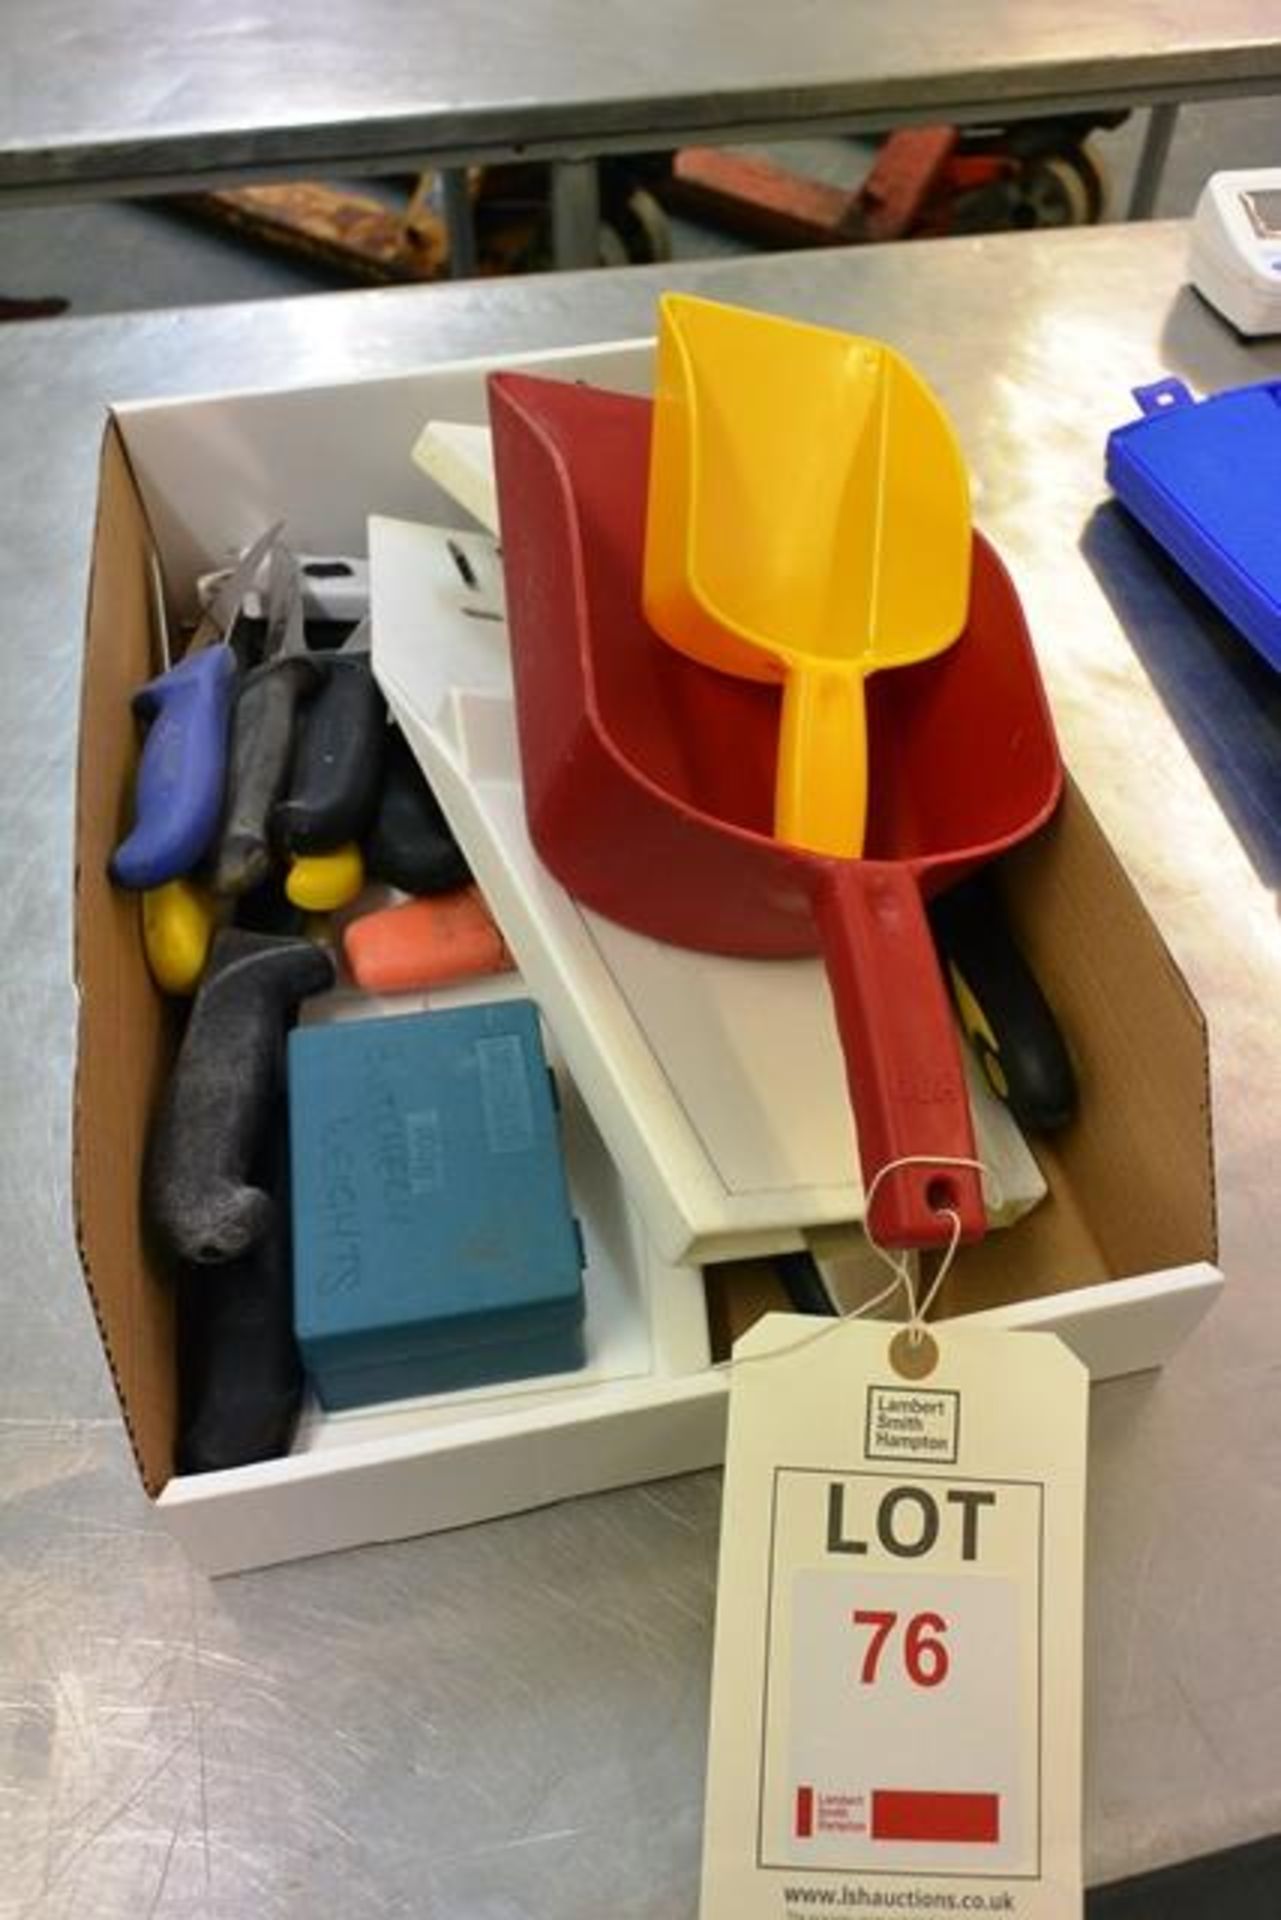 Box and contents including butchery knives, scoops, etc. (ID will be requested upon collection)